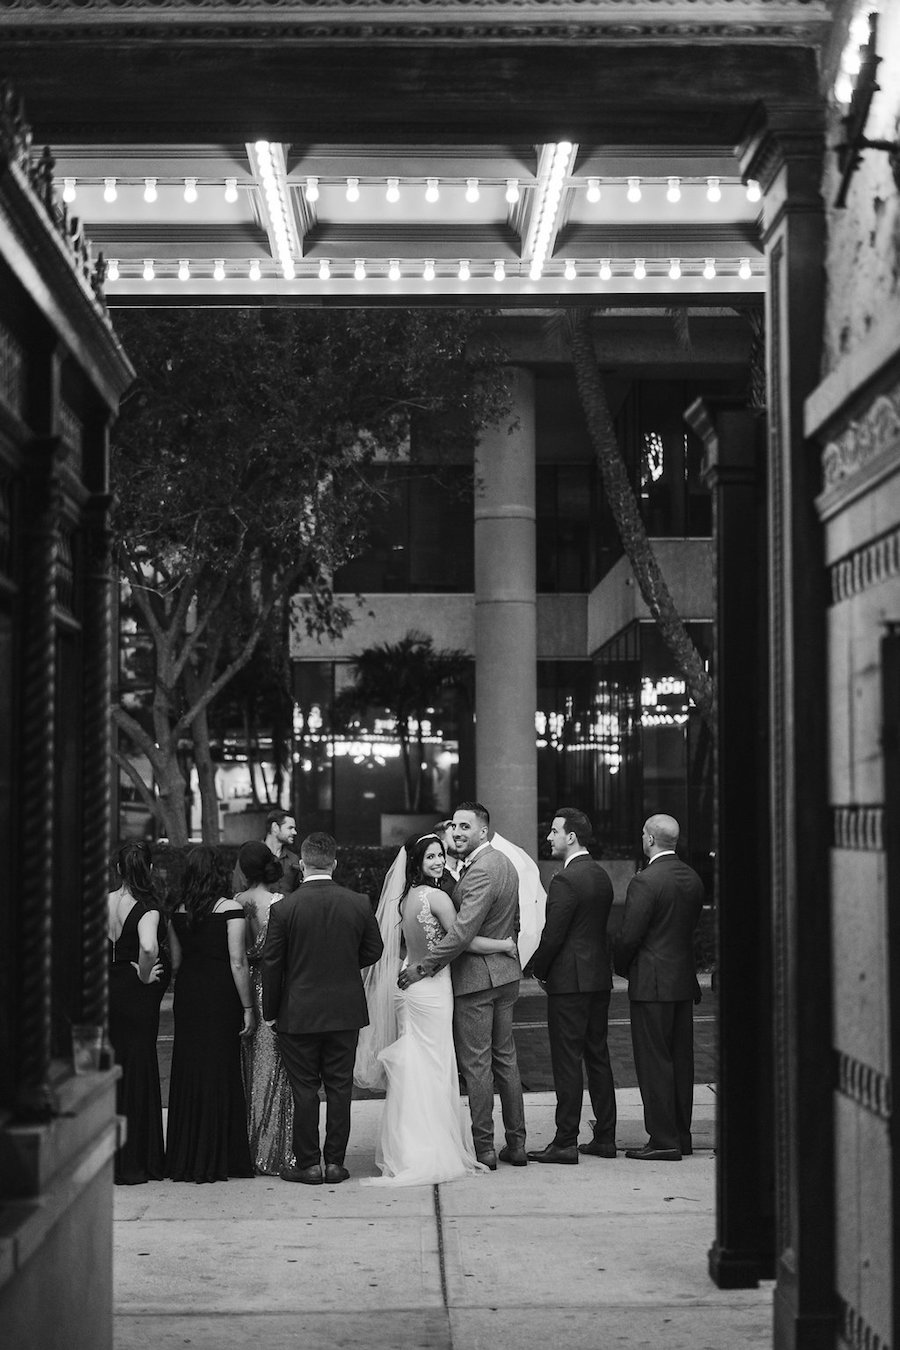 Tampa Theatre Bride and Groom Wedding Portrait | Tampa Bay Wedding Photographer Marc Edwards Photographs